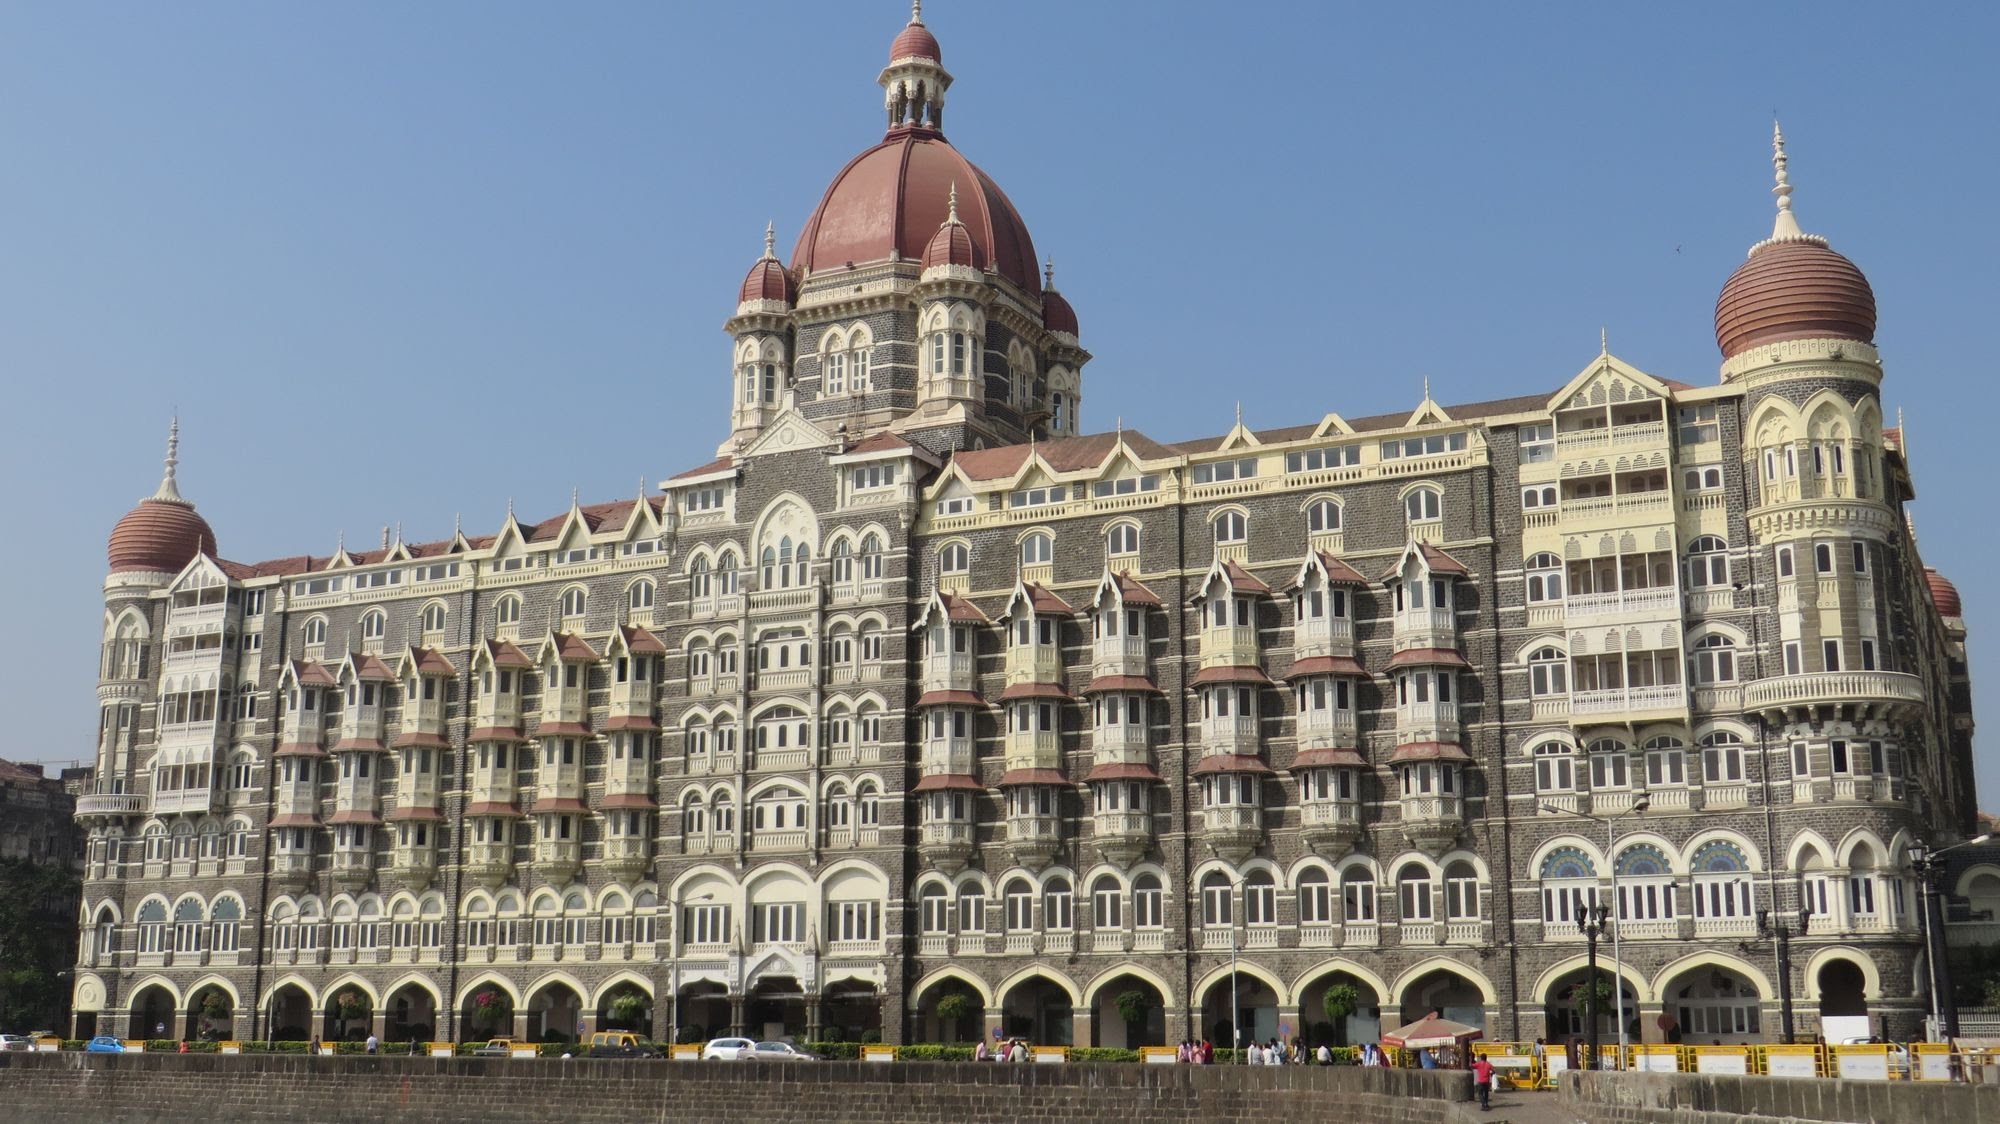 Amazing The Taj Mahal Palace Hotel Pictures & Backgrounds